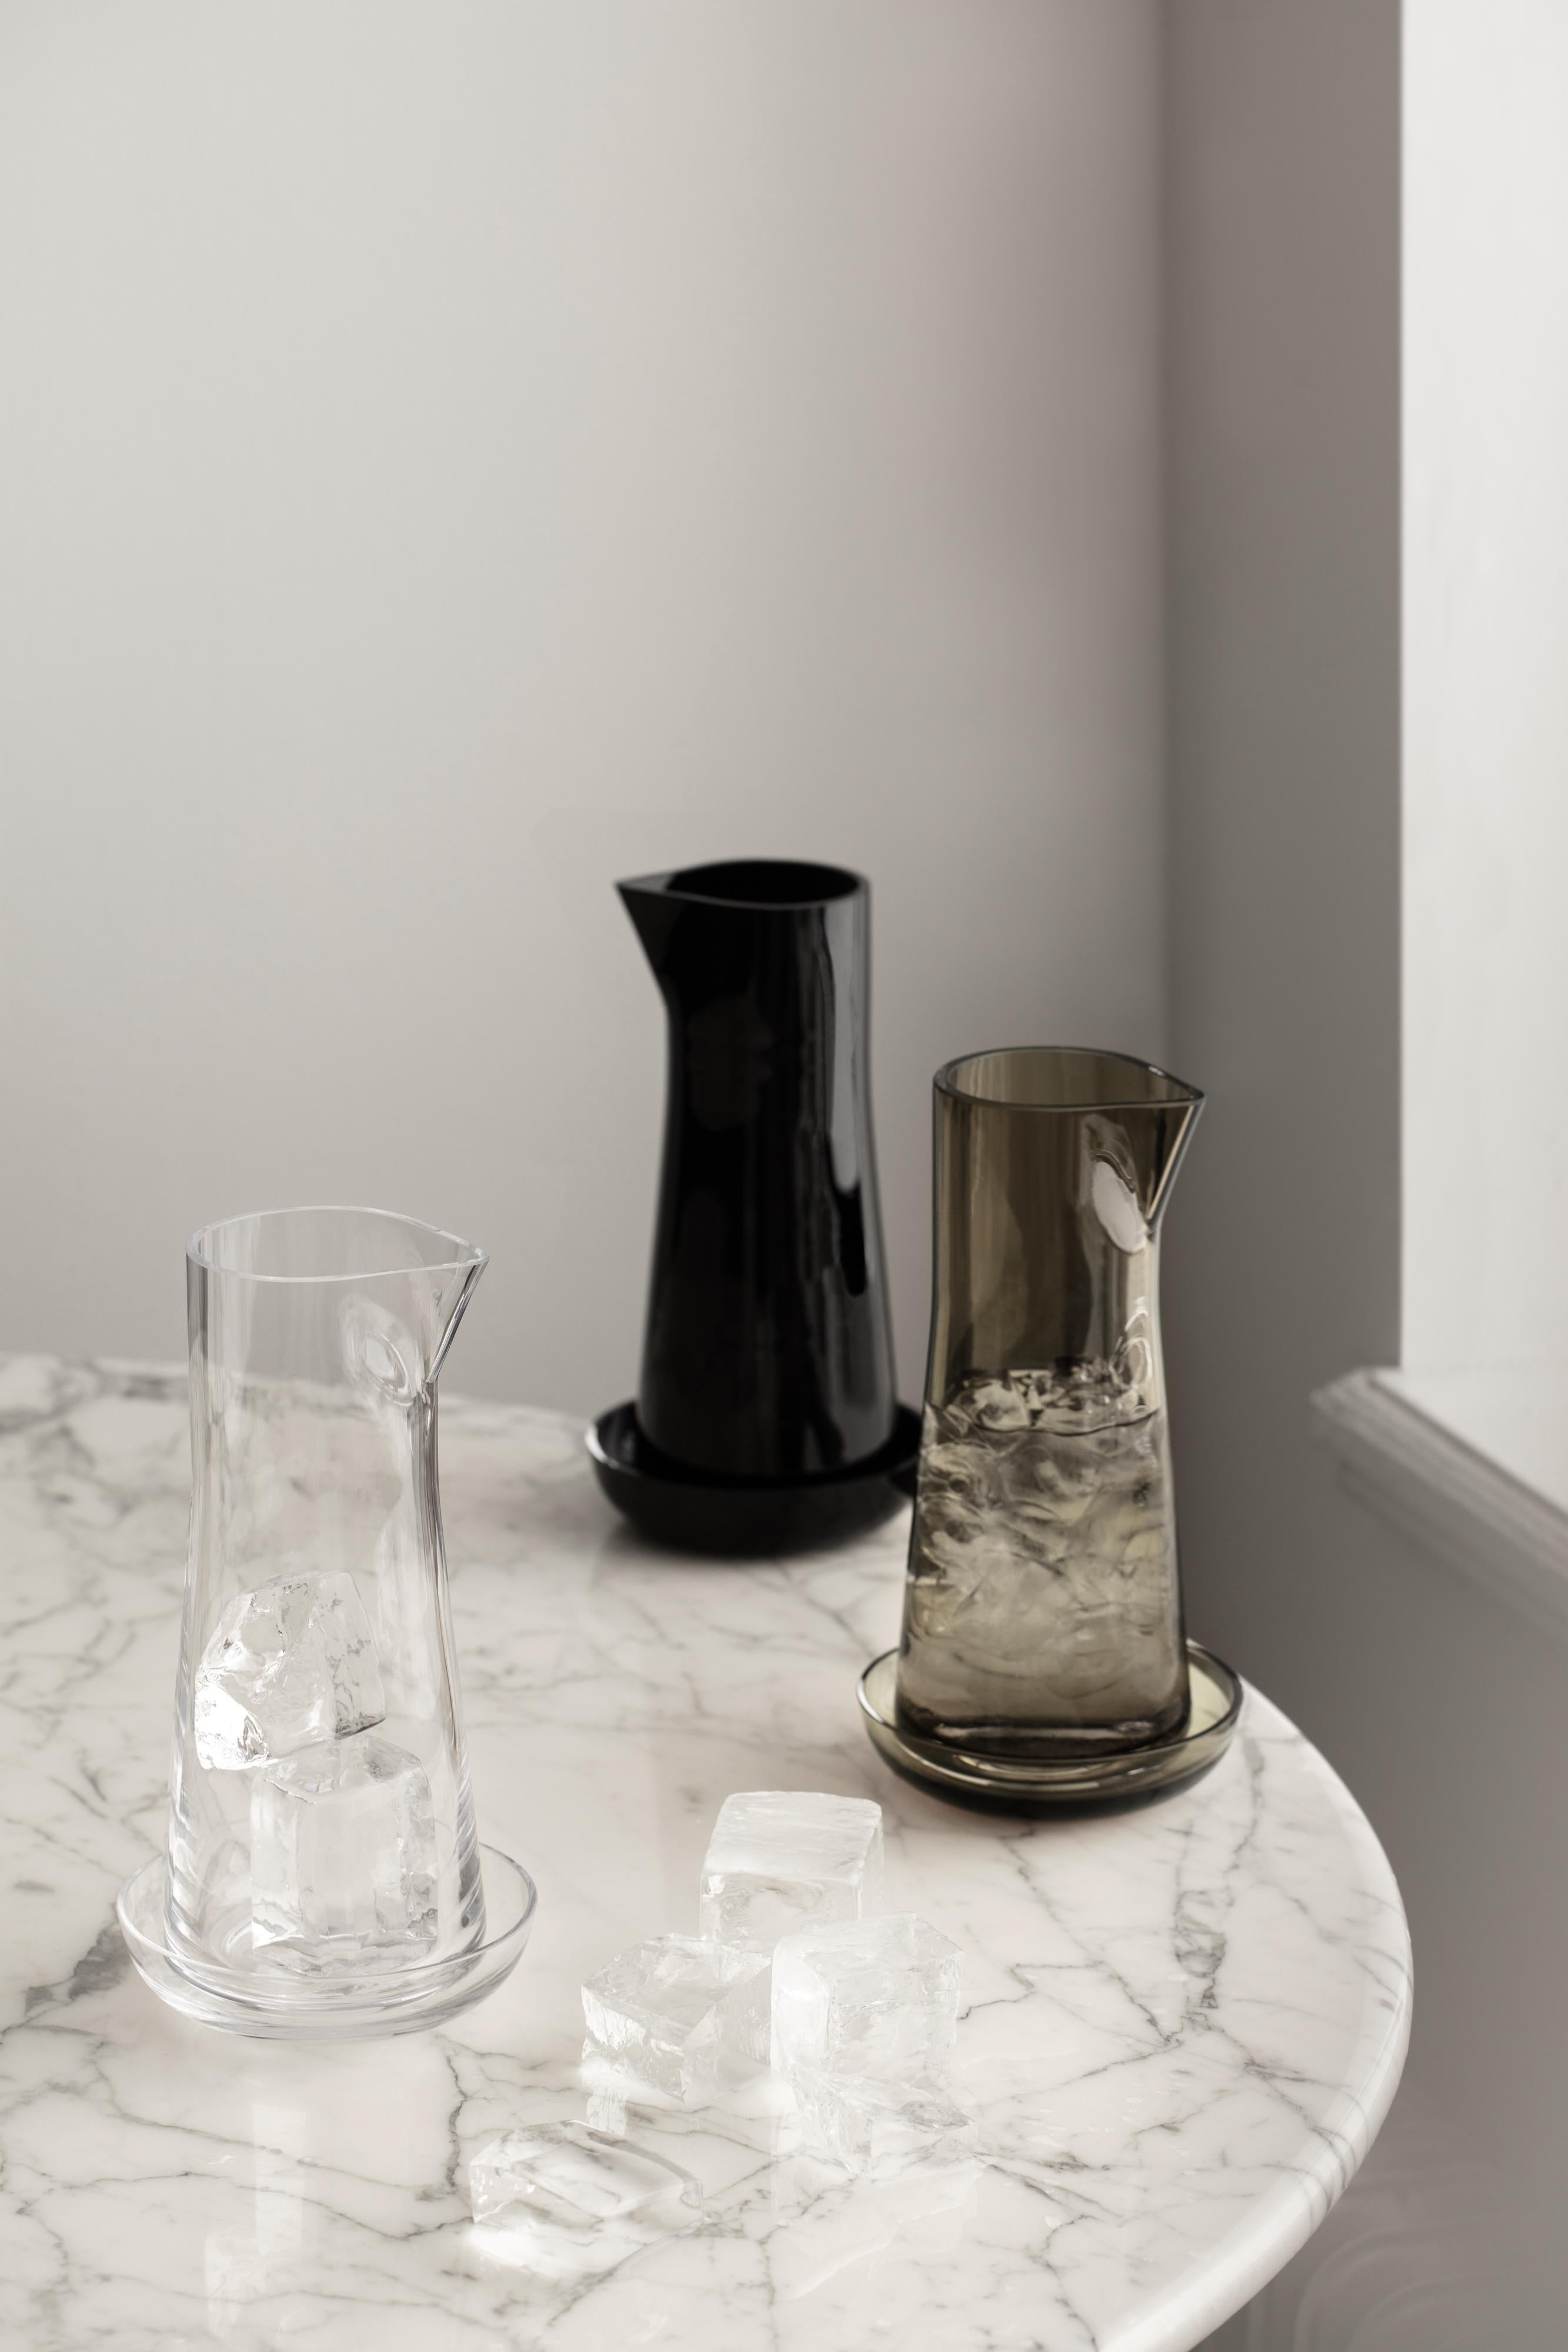 The Informal carafe in olive from Orrefors holds 34 oz and is the centerpiece of the collection. It has a characteristic spout and includes a small bowl that can be used as a coaster for the carafe. The bowl is also perfect for serving nuts, olives,